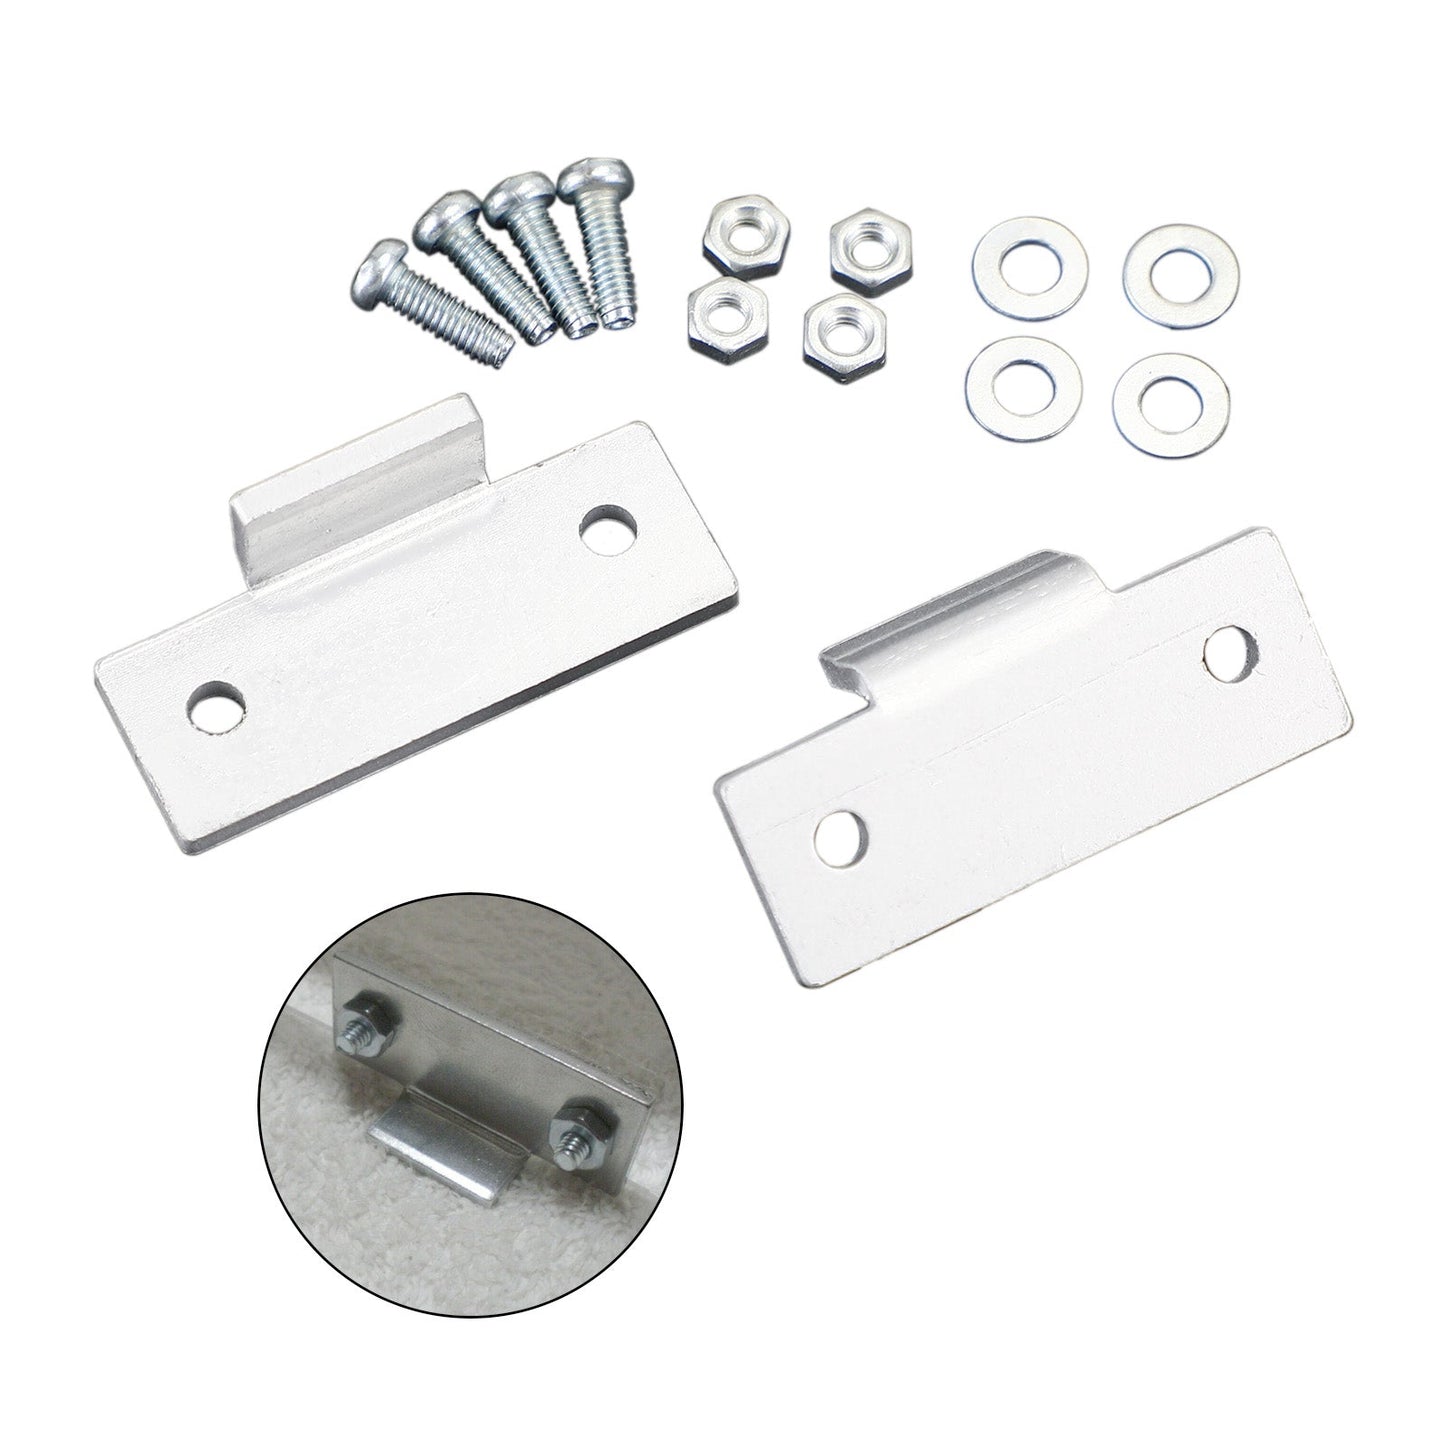 Two Dust Cover Fix Repair Brackets Hinge For SL-Q2 Q3 3200 Q200 Others Turntable